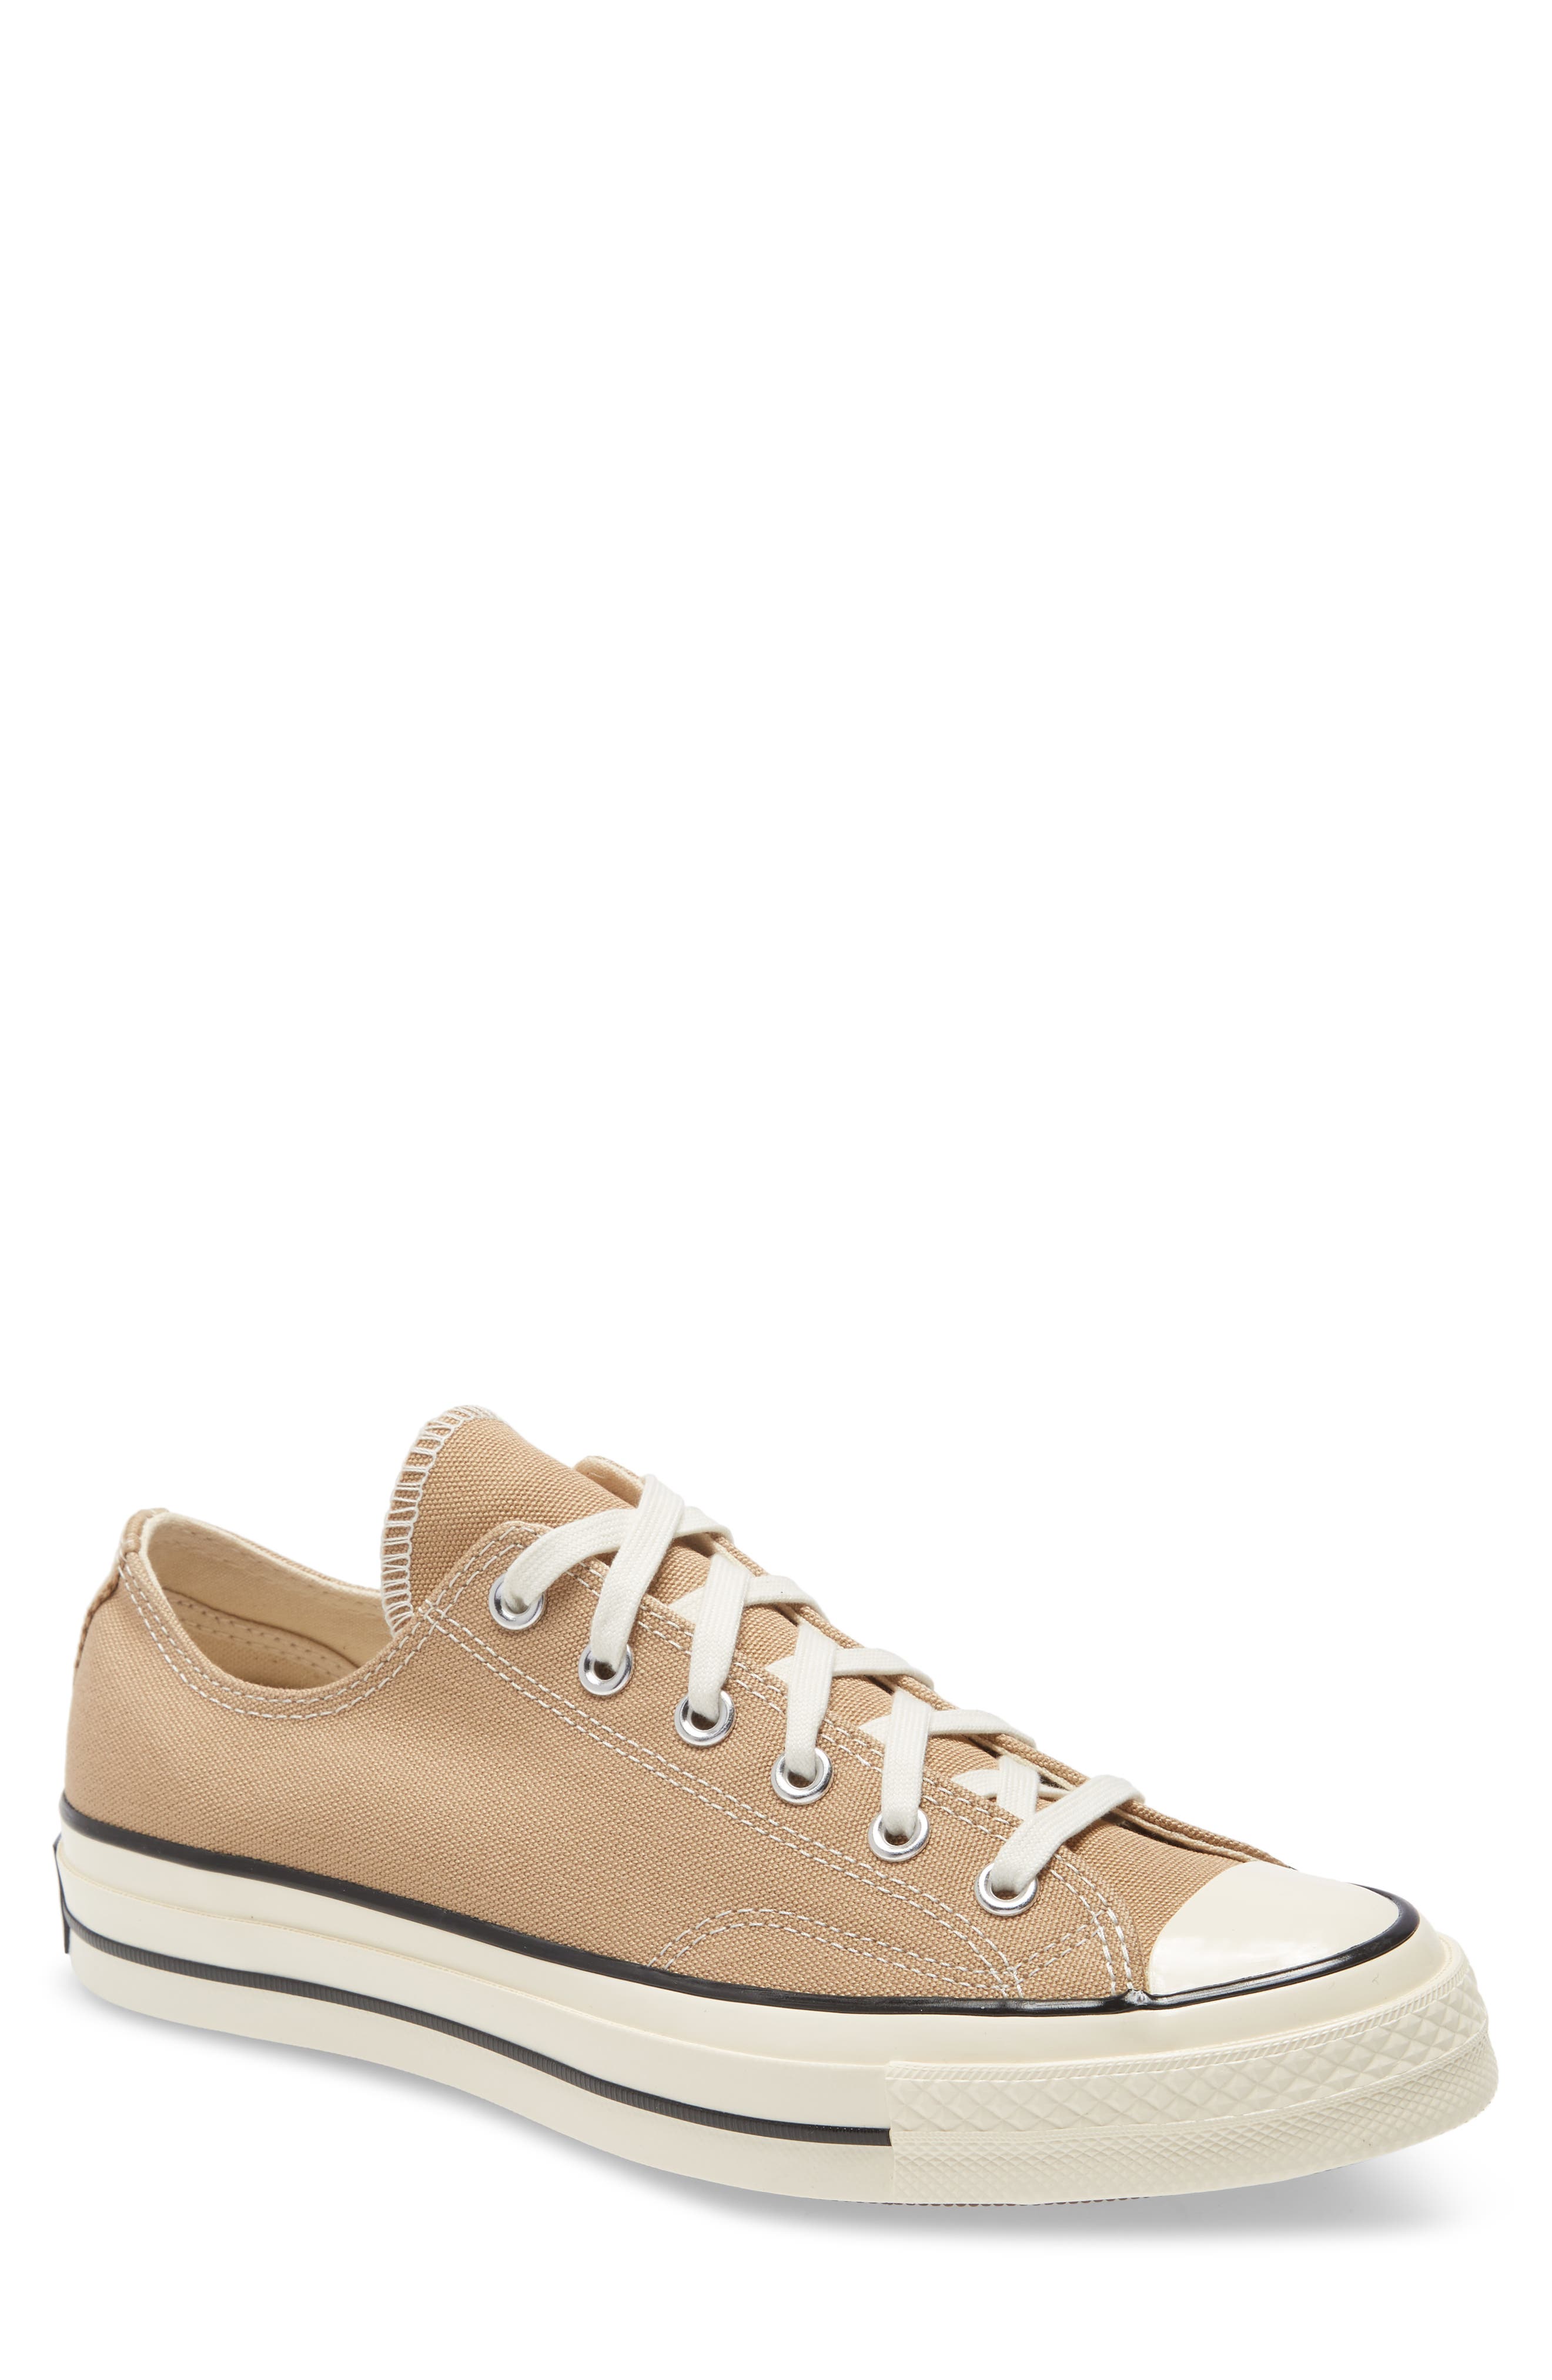 Converse Chuck Taylor® All Star® 70 Low Top Sneaker In Nomad Khaki/ Egret/ Black